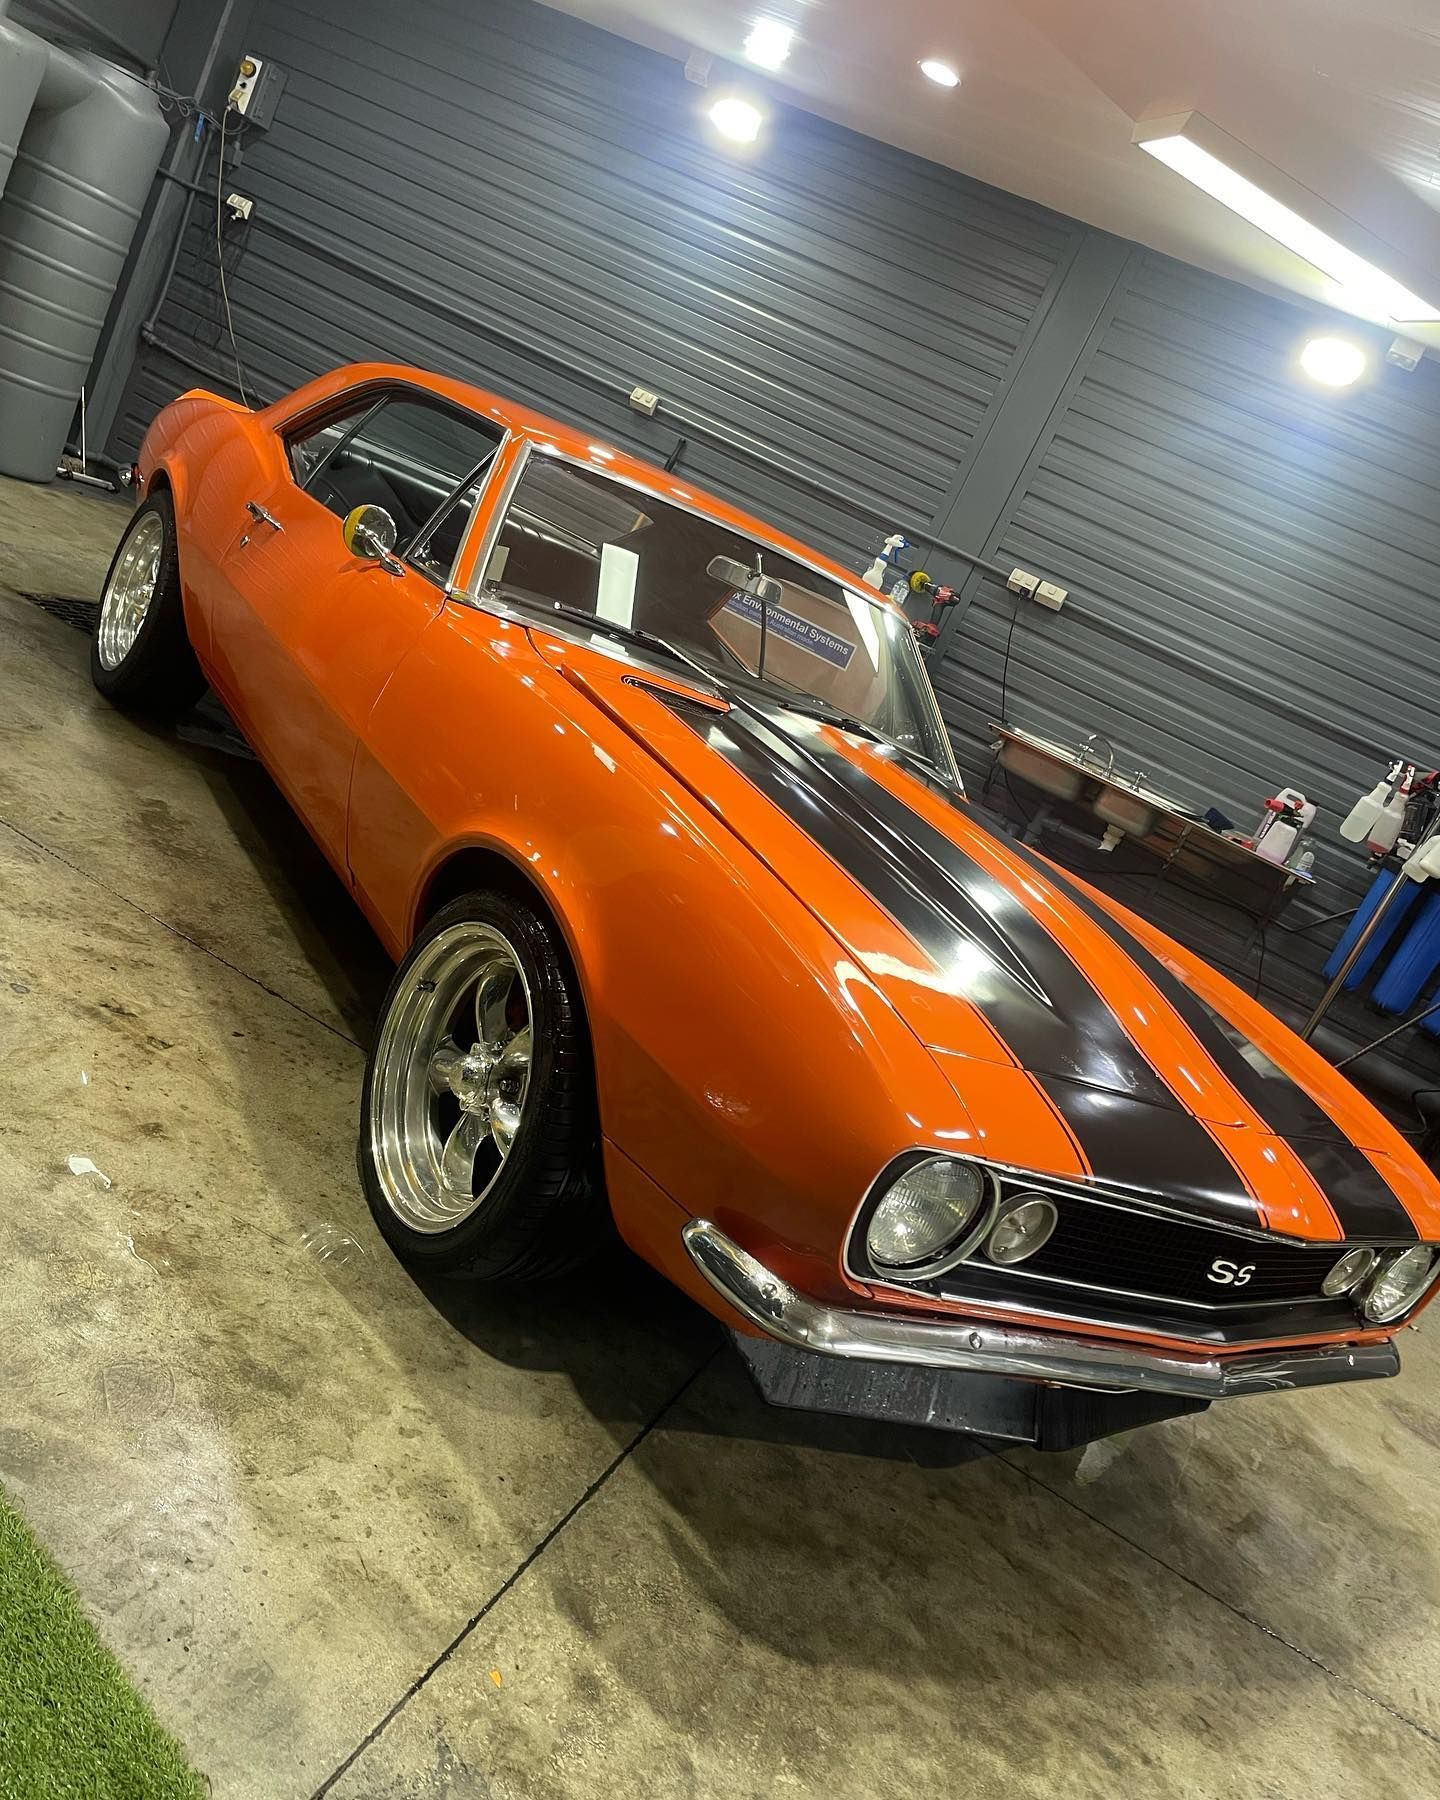 An Orange Car with Black Stripes is Parked in a Garage - Maroochydore, QLD - Top Coat Auto Detailing